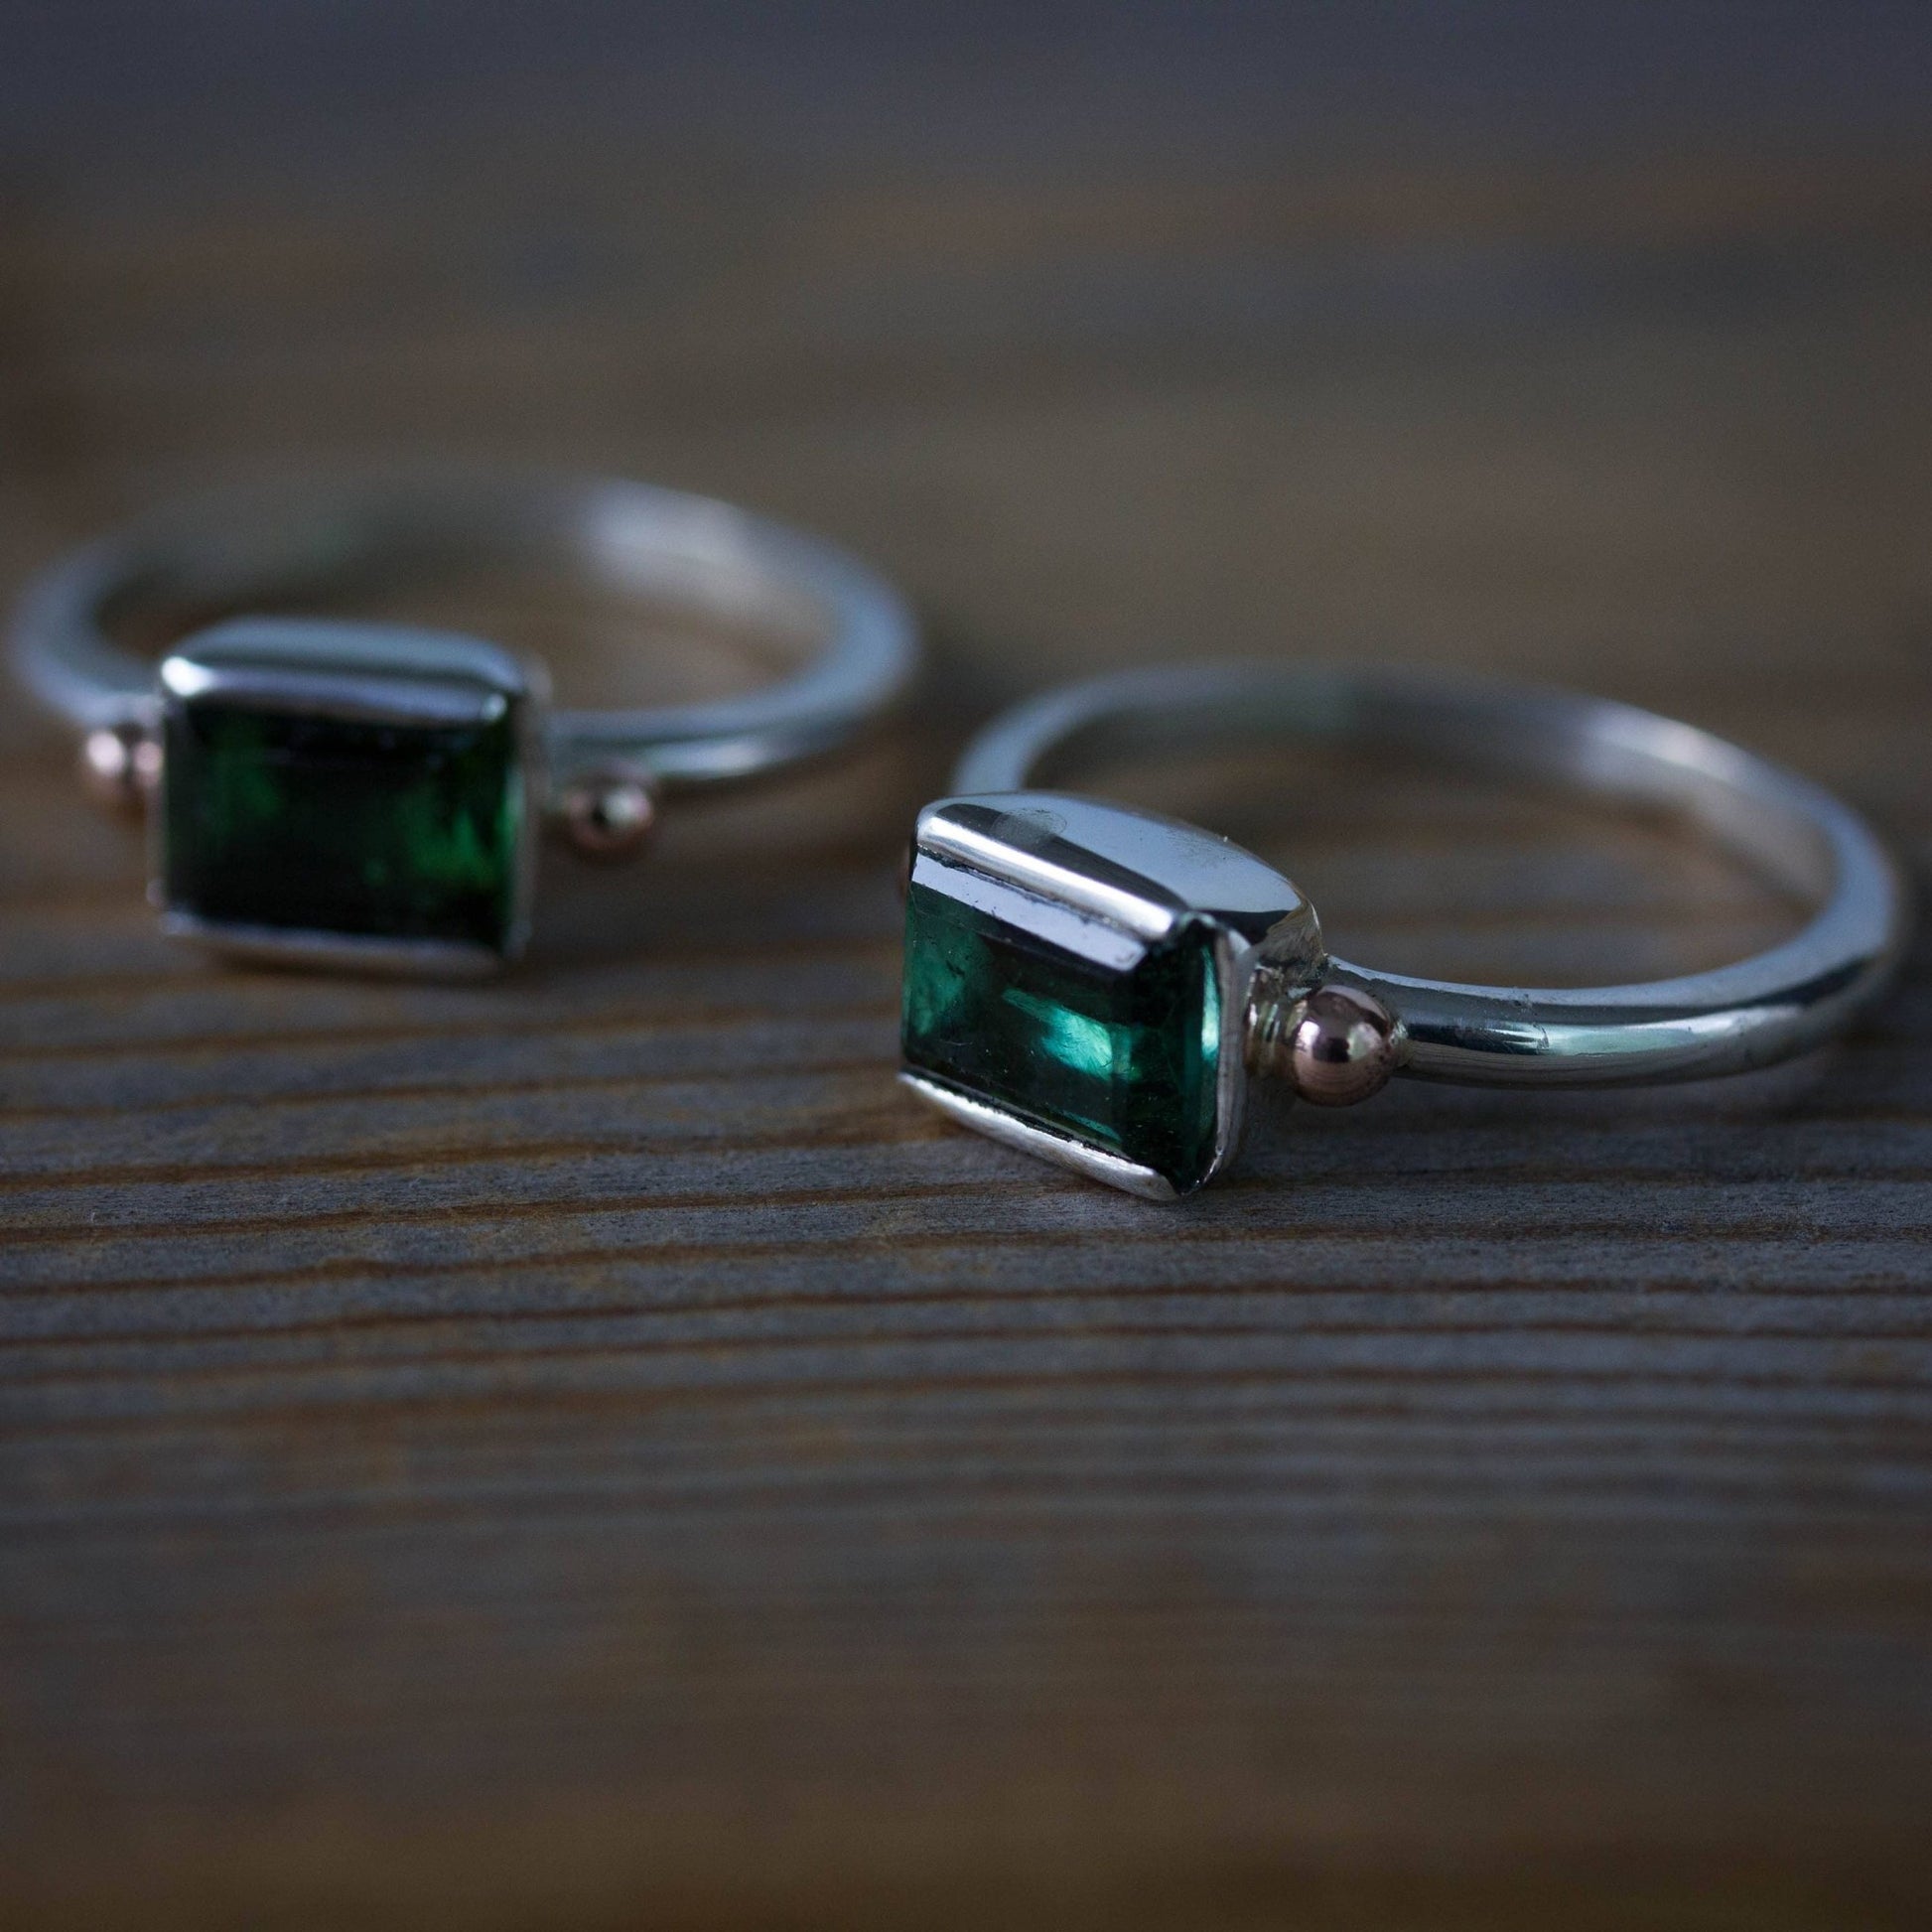 Emerald Cut Green Tourmaline Gemstone in Recycled Silver and Rose Gold Ring, Personalized October Birthstone - Madelynn Cassin Designs